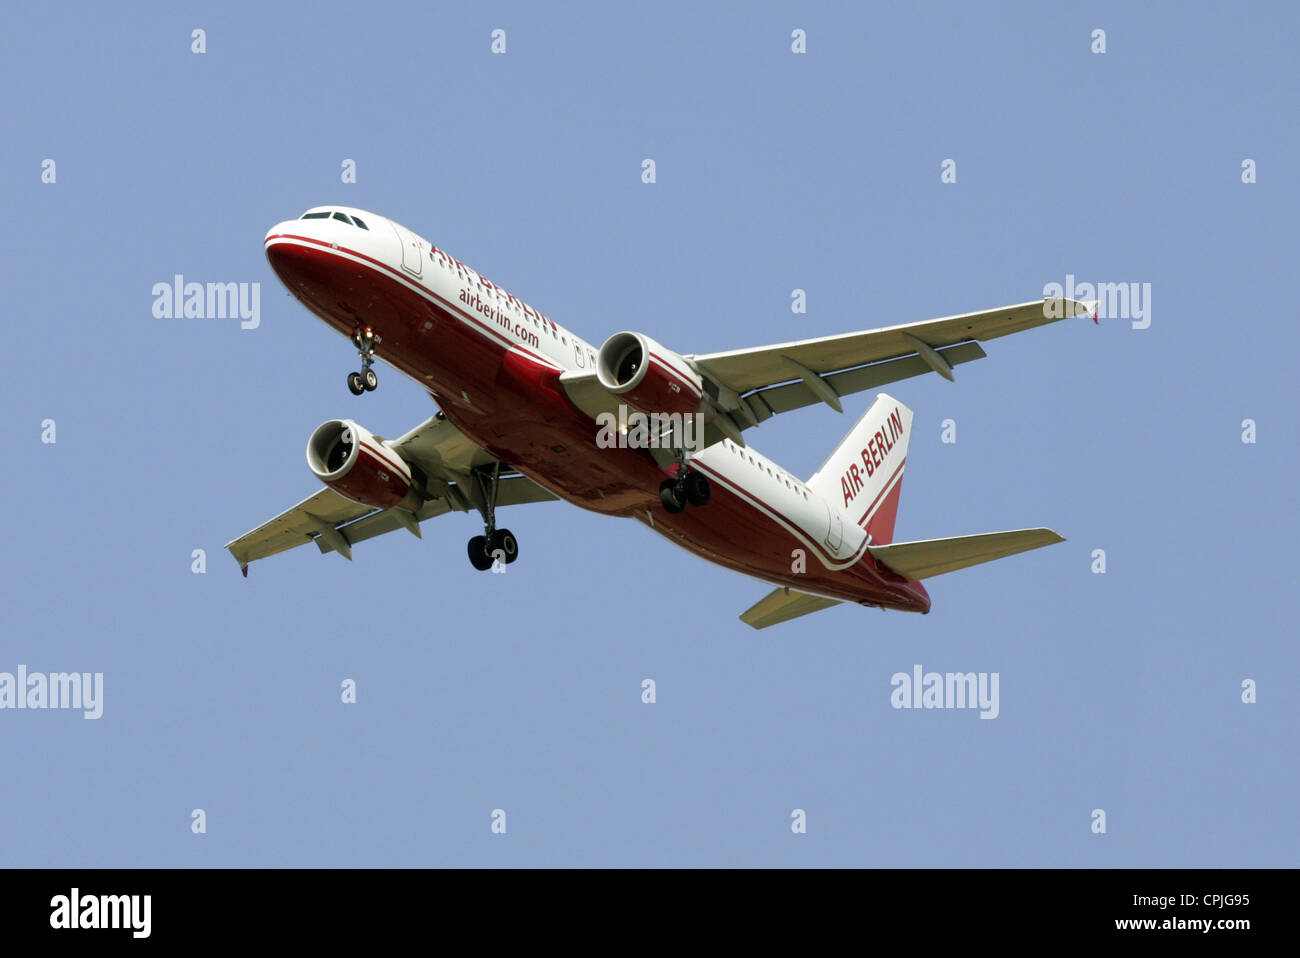 An Air Berlin airplane in the air, Hannover, Germany Stock Photo